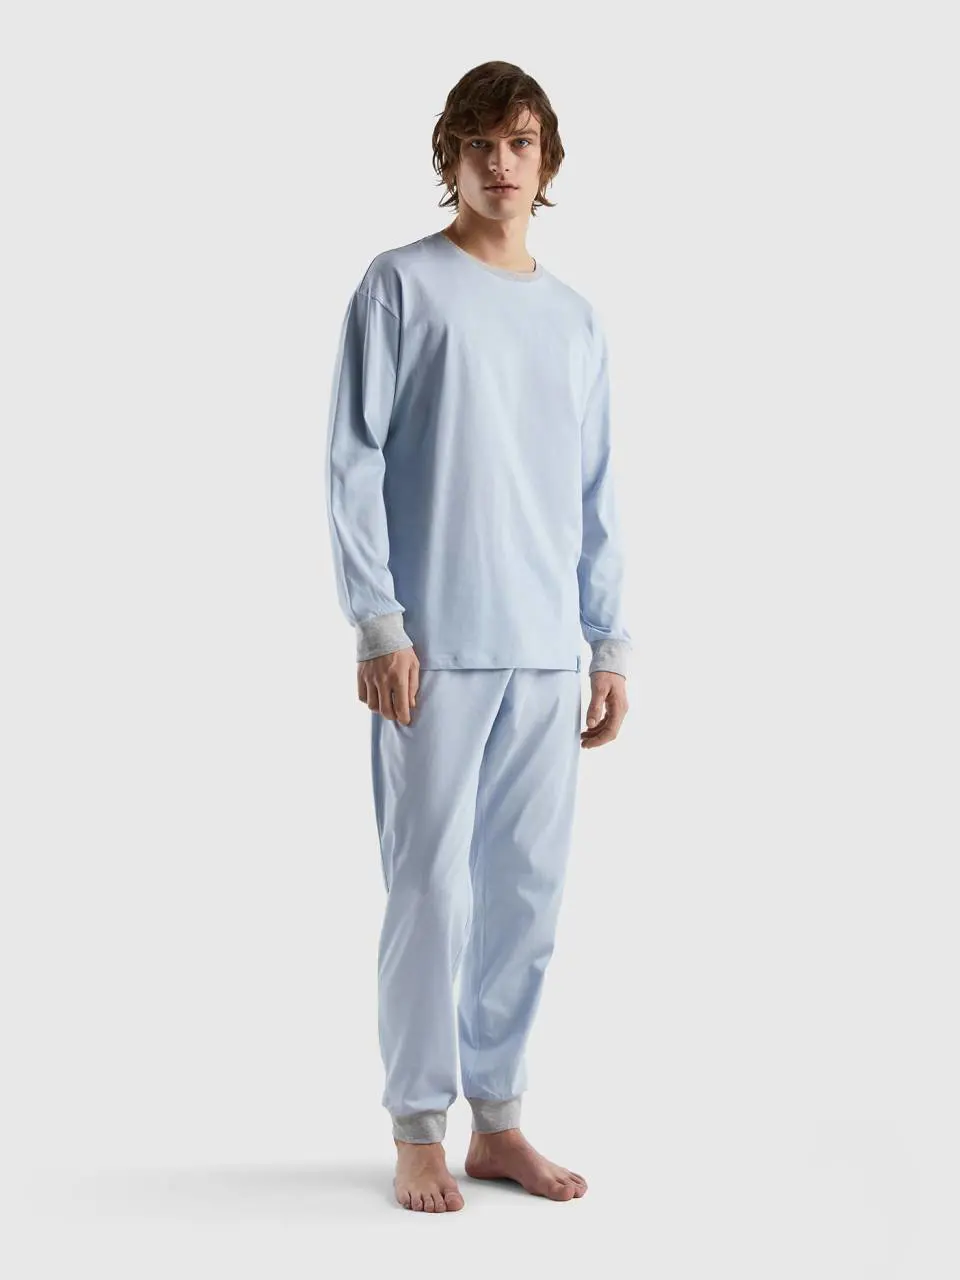 Benetton pyjamas with pouch in 100% cotton. 1